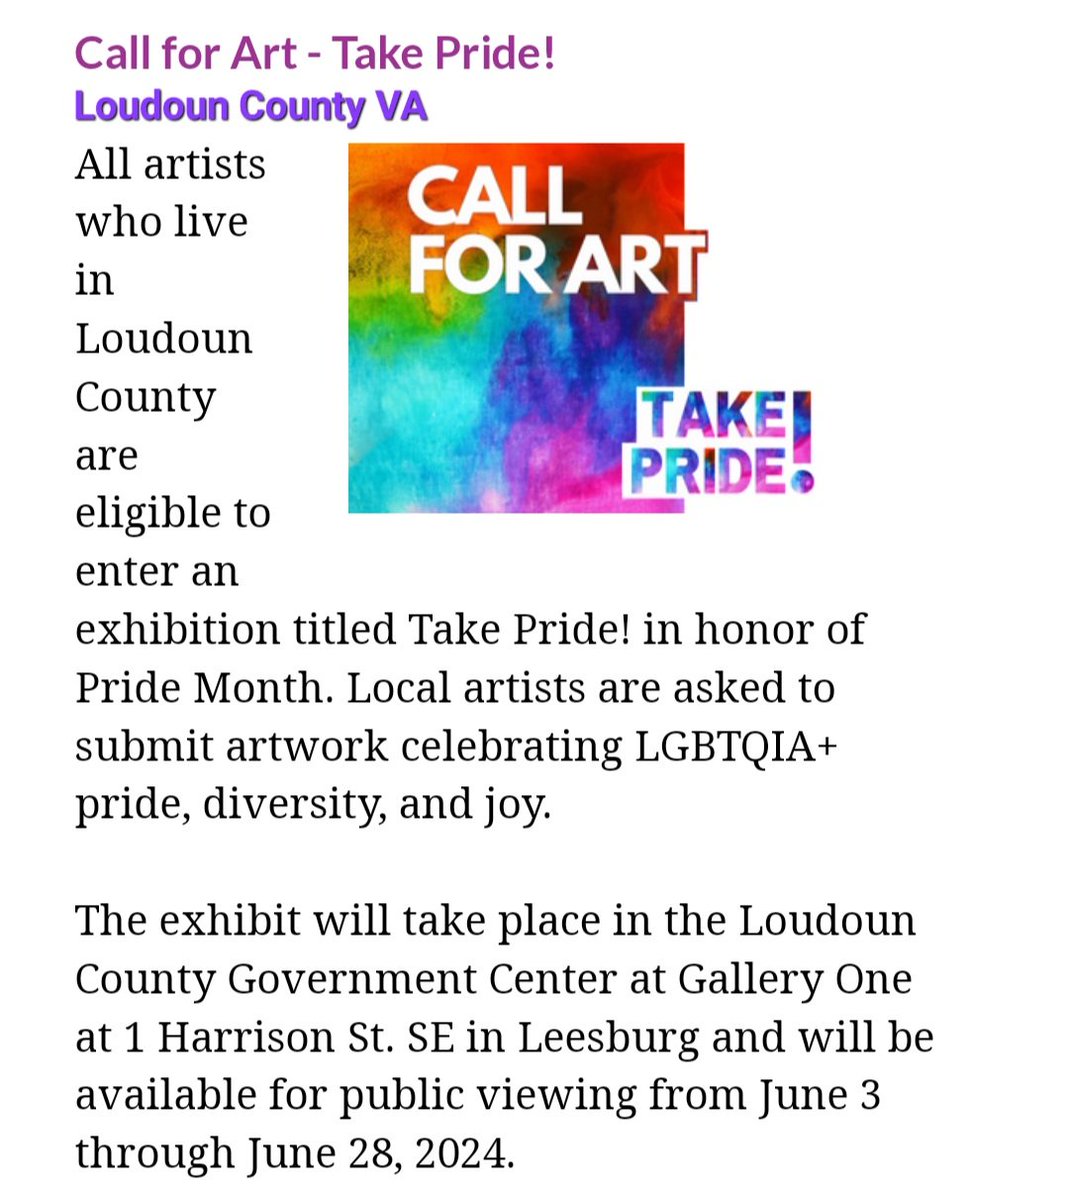 For information loudoun.gov/advisory-art guidelines and application 
CALL FOR ART - 'TAKE PRIDE!' ART EXHIBITION, Loudoun County, VA
#LoudounCounty #LoudounCountyVA #Virginia #Art #ArtCall #Exhibition #Pride #PrideMonth #TakePride  #LoudounAAC #GalleryOne #LoudounCountyGovernment